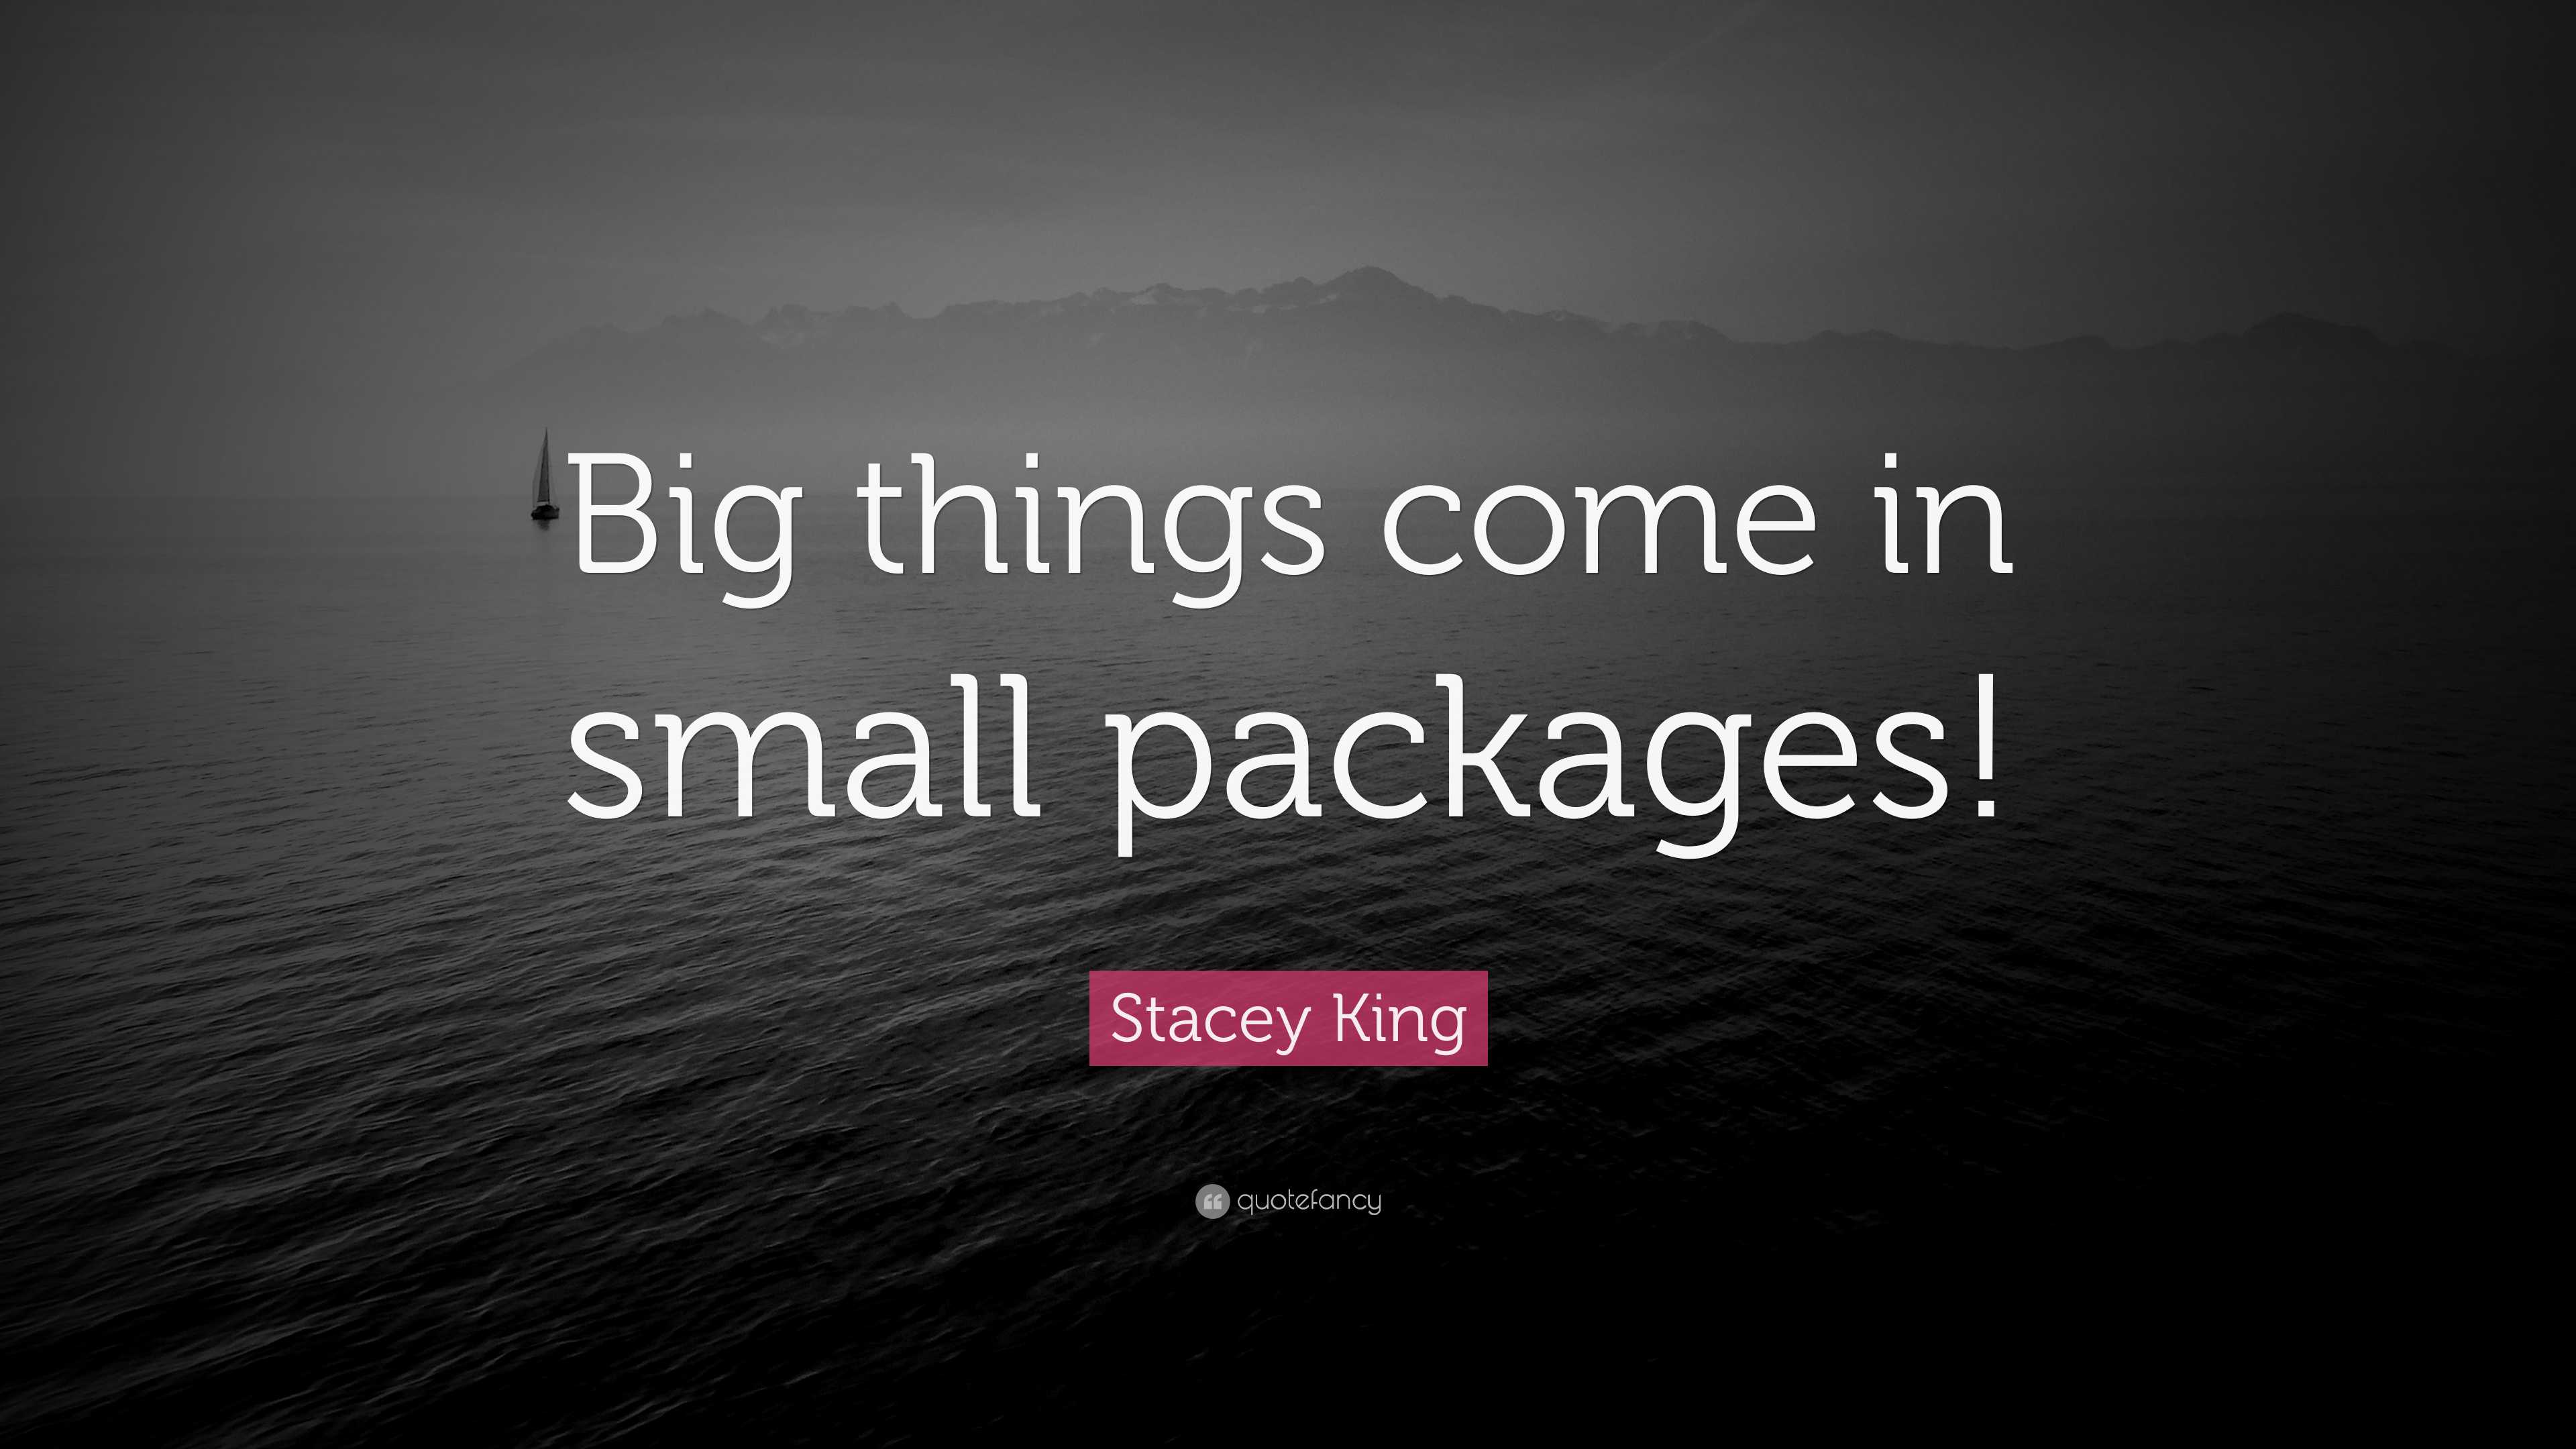 https://quotefancy.com/media/wallpaper/3840x2160/7914131-Stacey-King-Quote-Big-things-come-in-small-packages.jpg